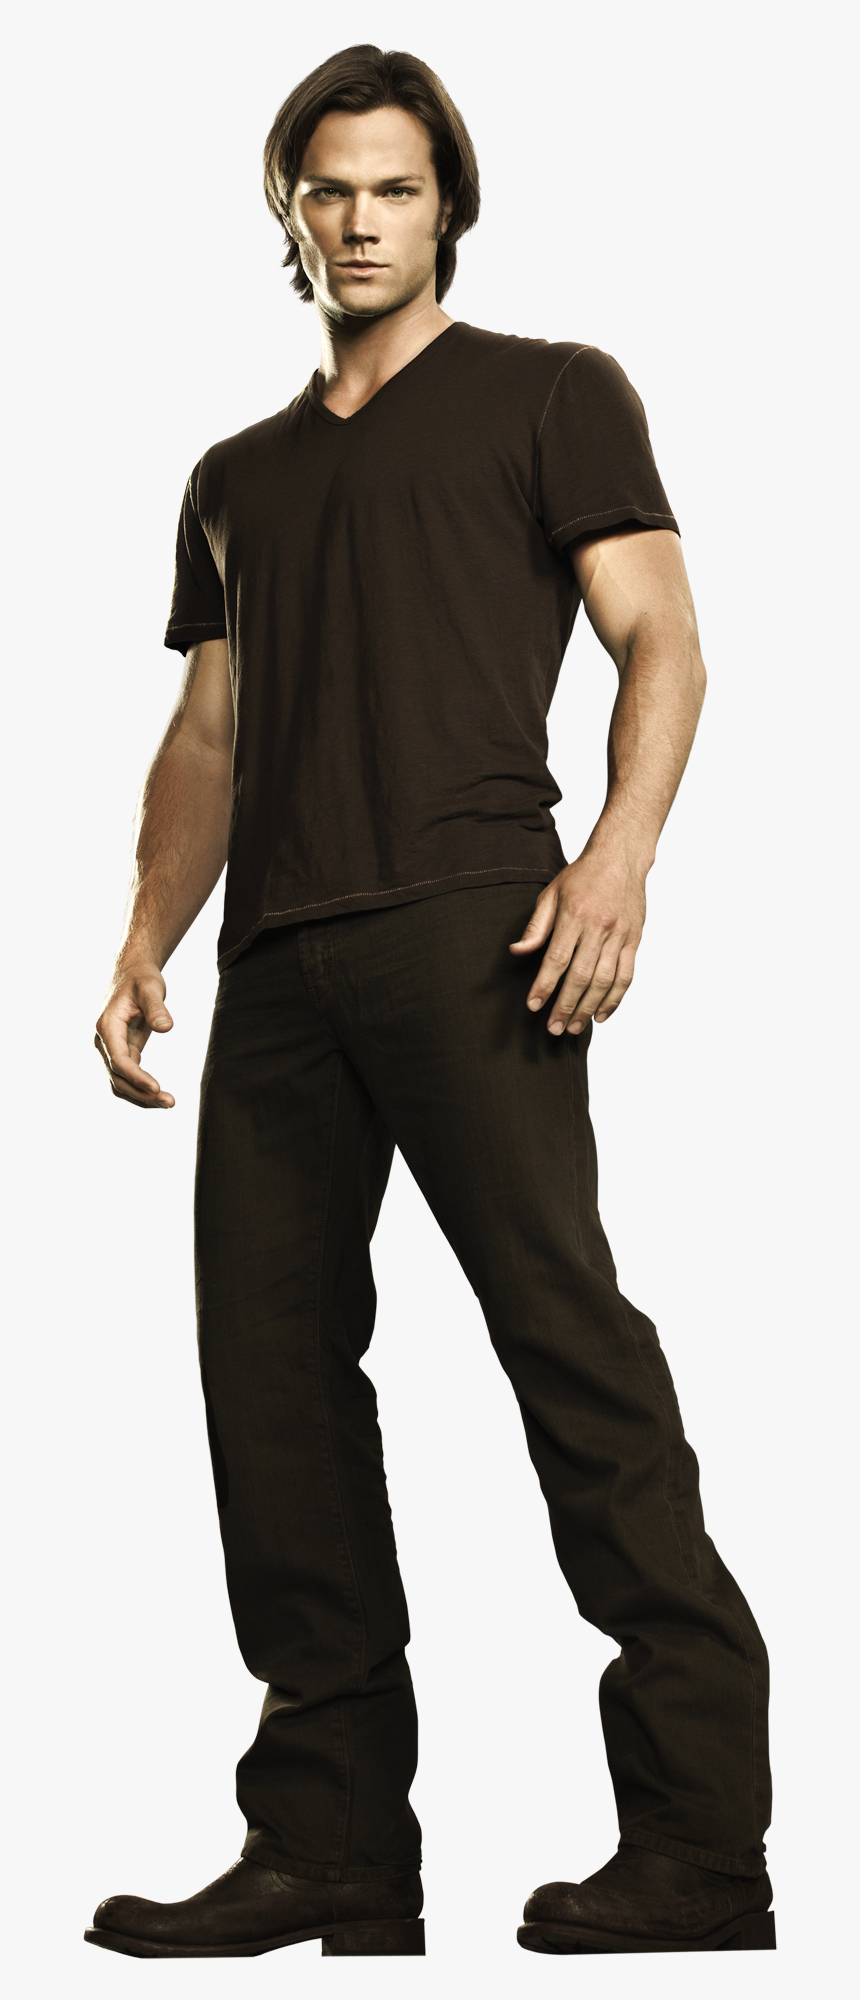 Sam Winchester Png - Sam Winchester Full Body, Transparent Png, Free Download